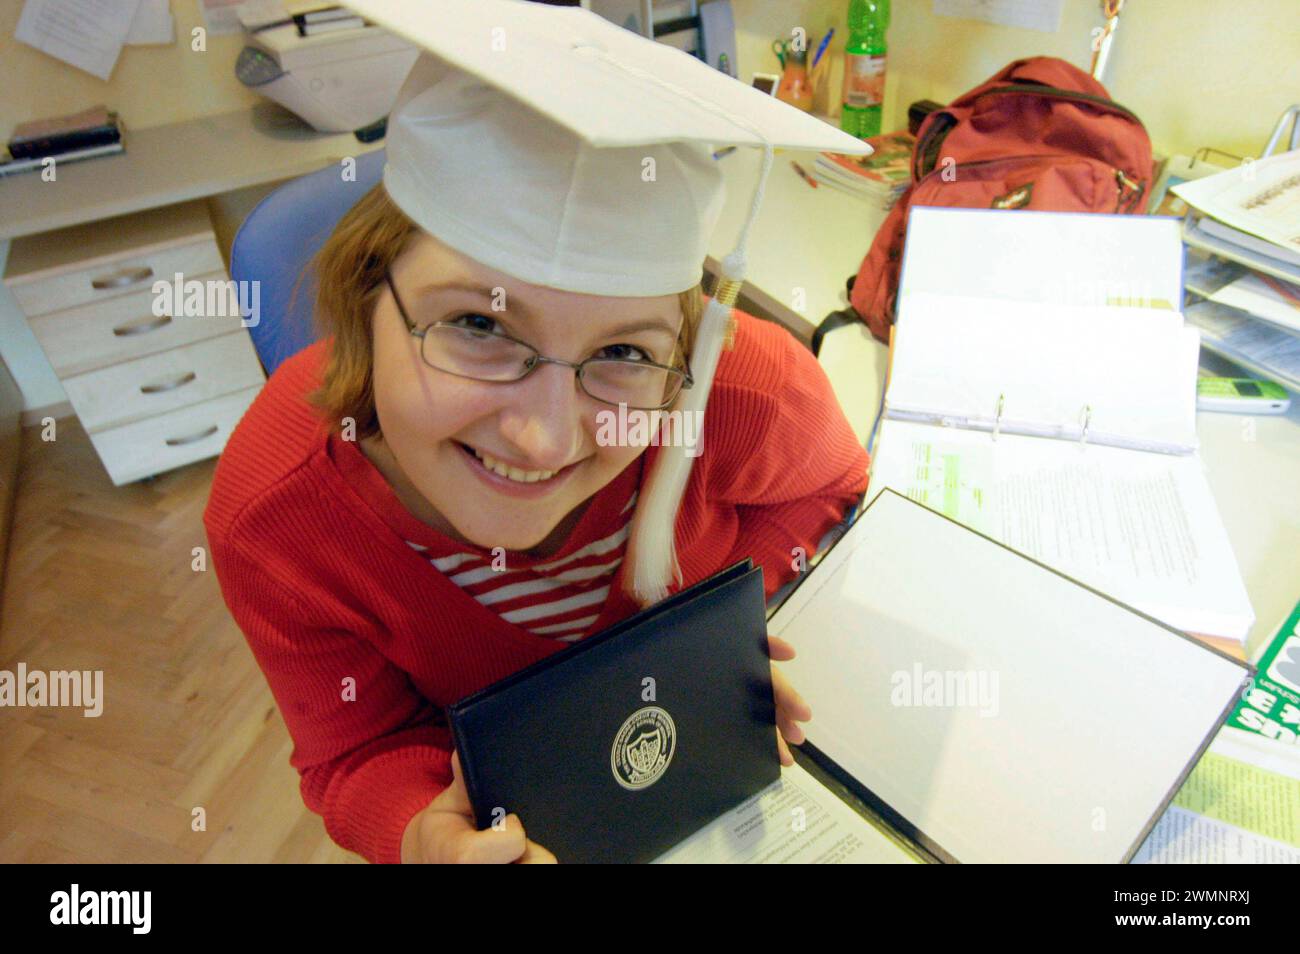 an university degree certificate, a diplom or diploma after graduating university degree certificate, diplom or diploma Stock Photo